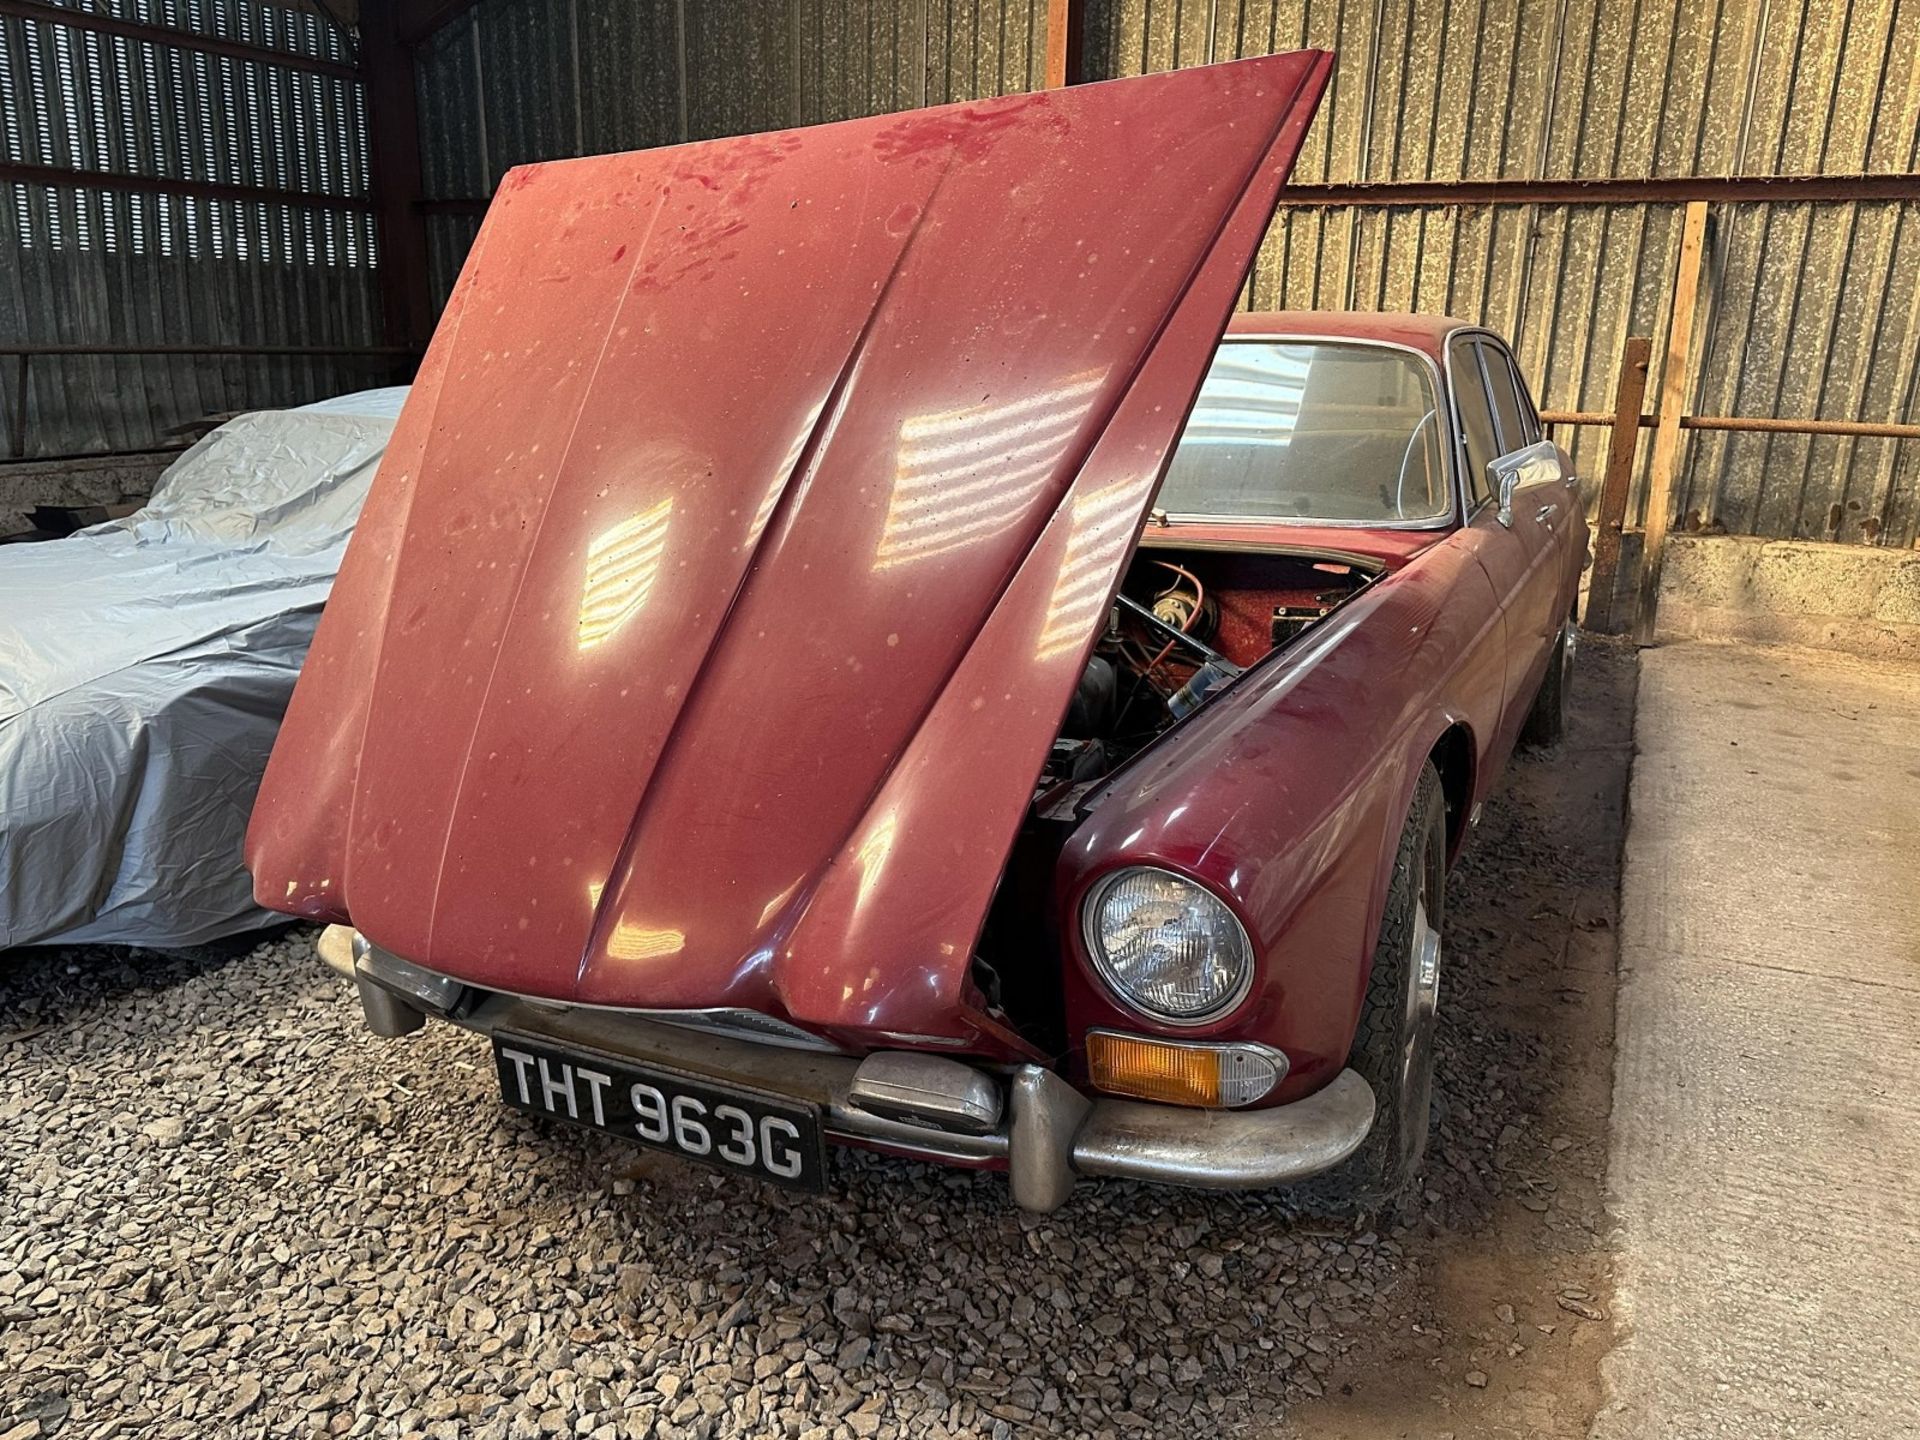 1969 Jaguar XJ6 4.2 Being sold without reserve Registration number THT 963G Red with a mushroom - Image 5 of 73